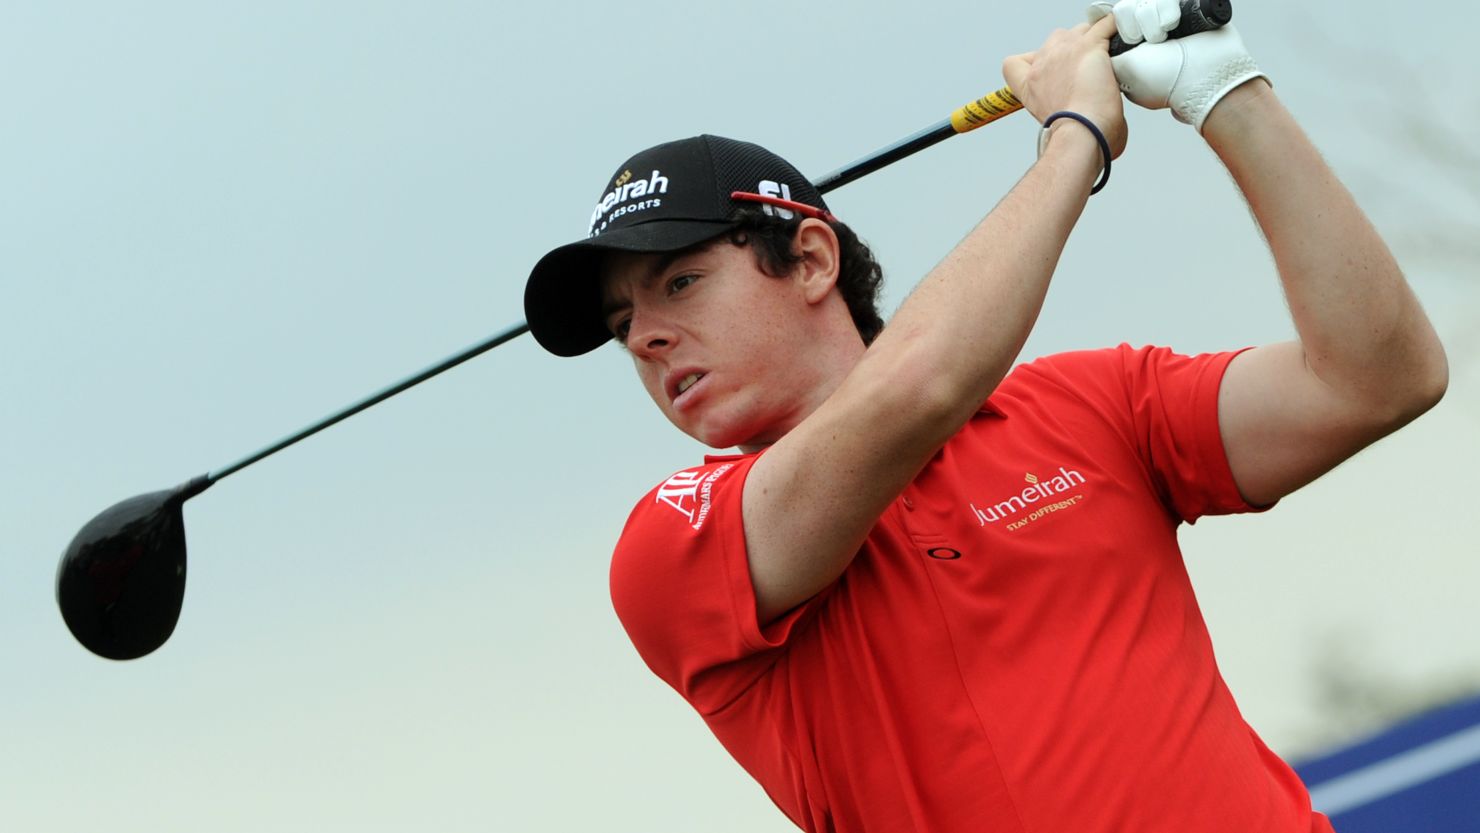 British golfer Rory McIlroy captured the first major of his career at this year's U.S. Open.